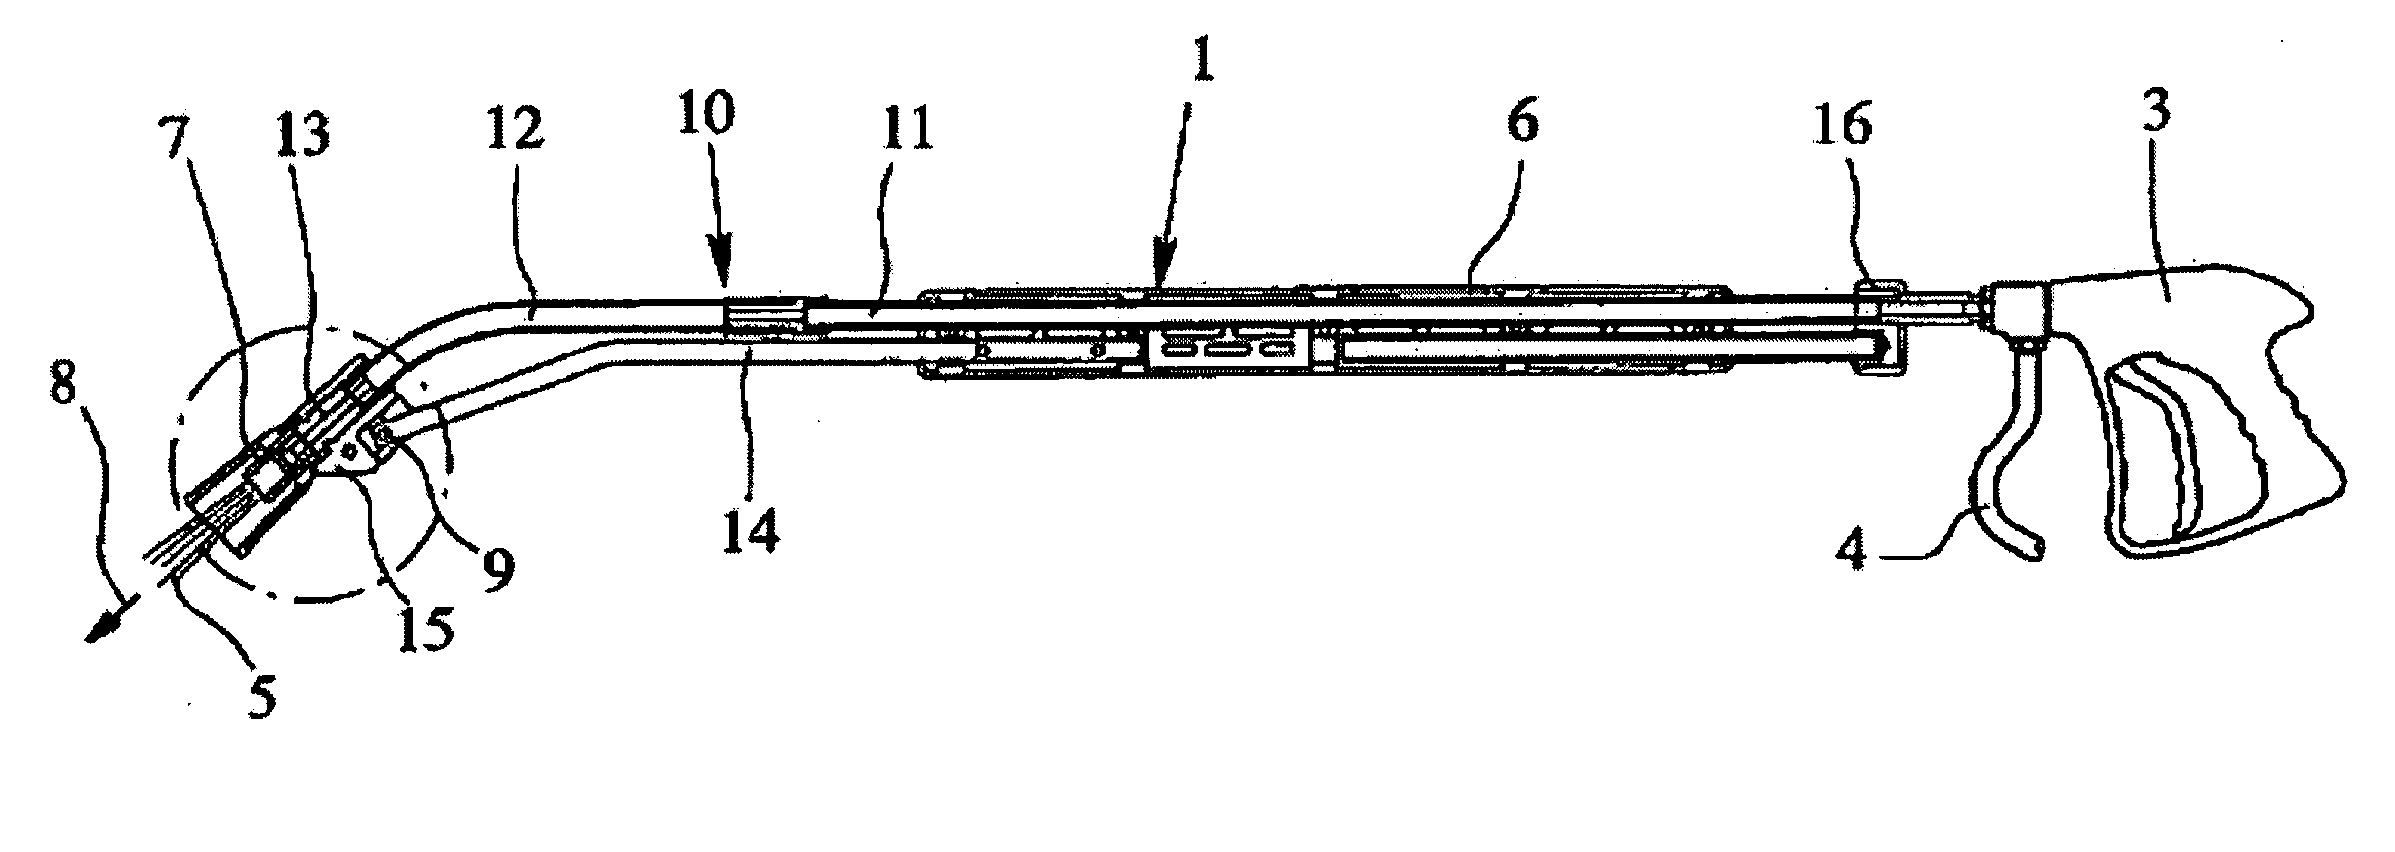 Spray lance for a high-pressure cleaning device